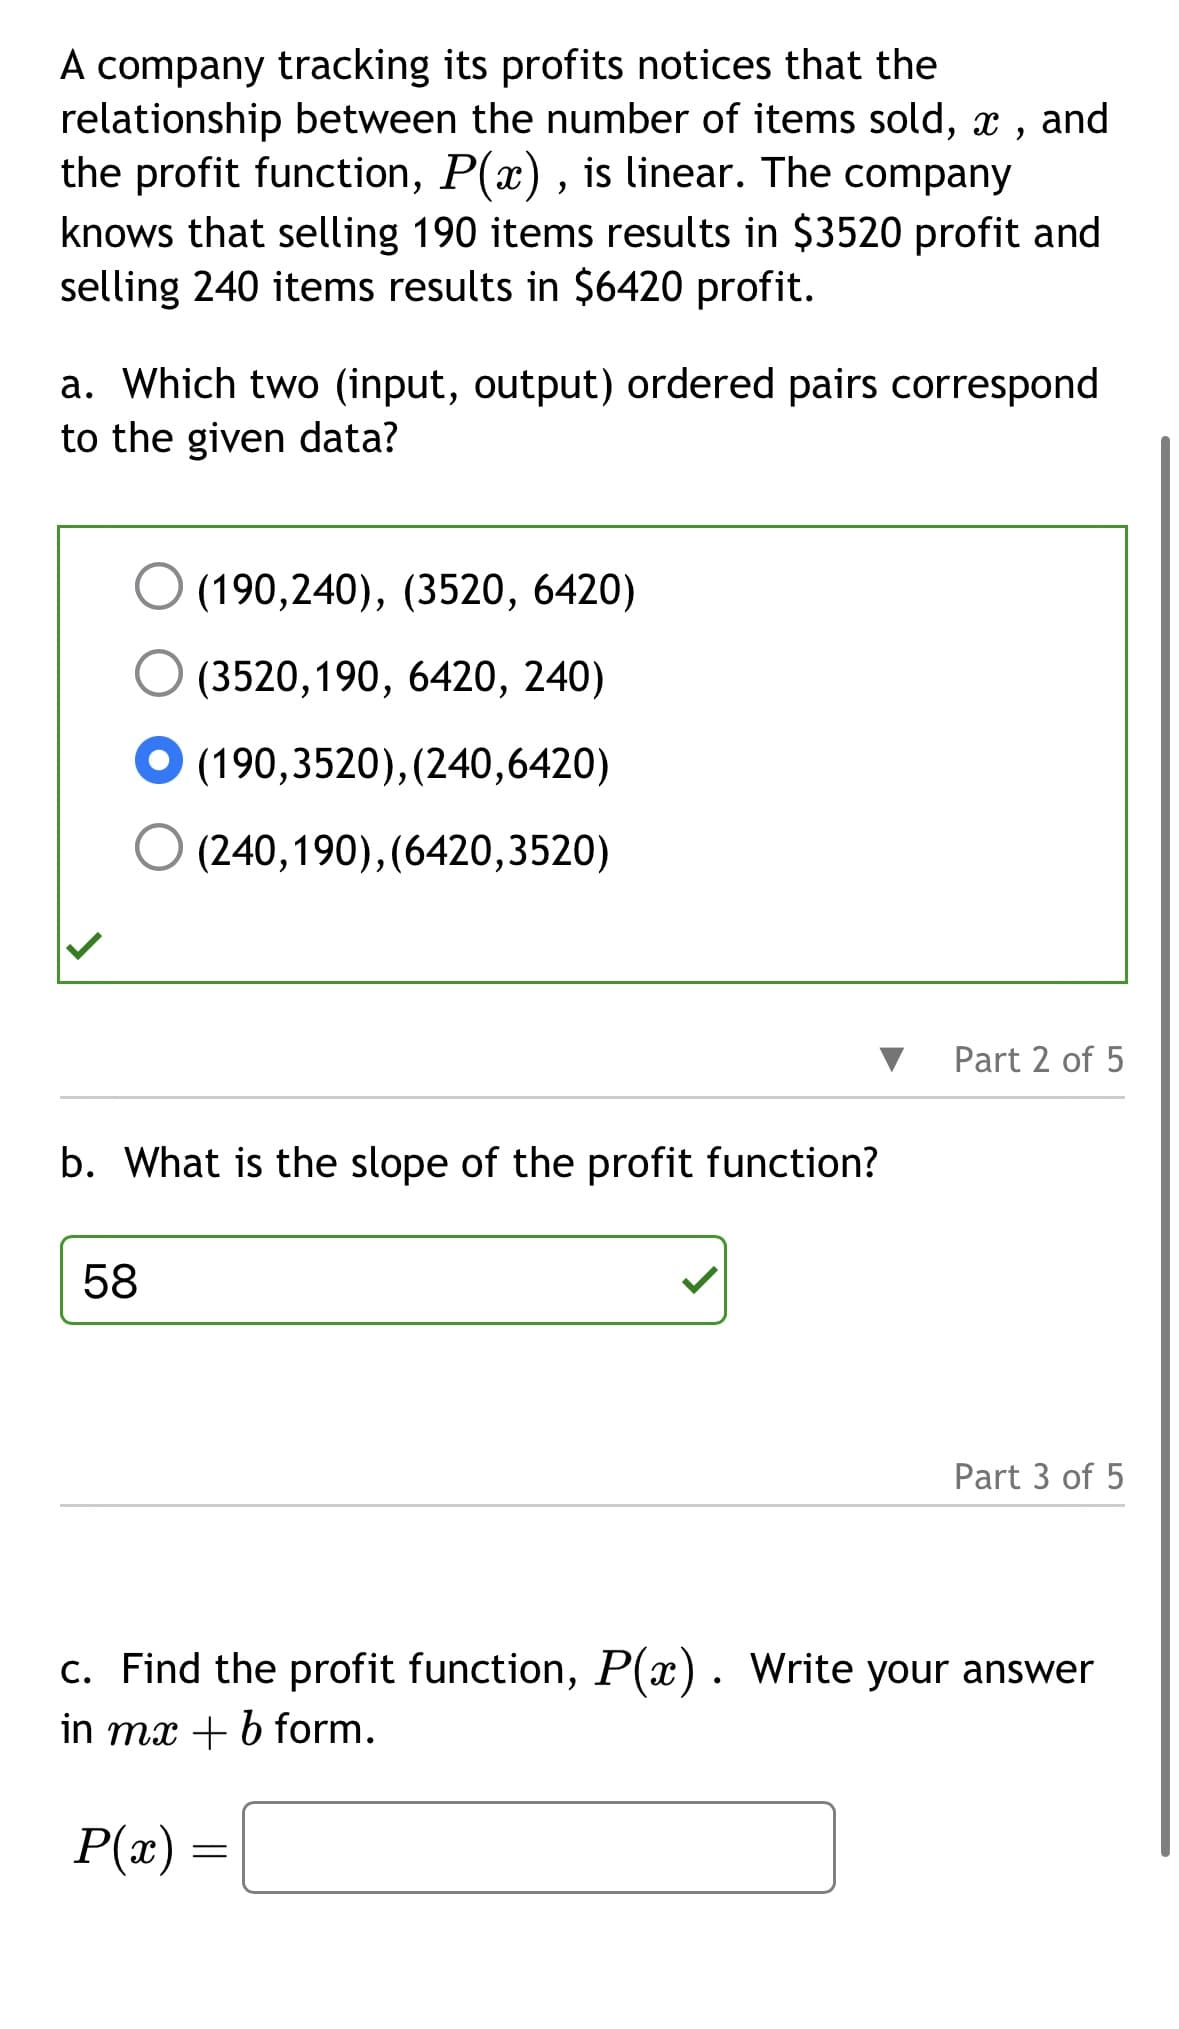 A company tracking its profits notices that the
relationship between the number of items sold, x,
the profit function, P(x), is linear. The company
knows that selling 190 items results in $3520 profit and
selling 240 items results in $6420 profit.
a. Which two (input, output) ordered pairs correspond
to the given data?
(190,240), (3520, 6420)
(3520,190, 6420, 240)
● (190,3520), (240,6420)
(240,190),(6420,3520)
b. What is the slope of the profit function?
58
P(x) =
Part 2 of 5
c. Find the profit function, P(x). Write your answer
in mx + b form.
=
Part 3 of 5